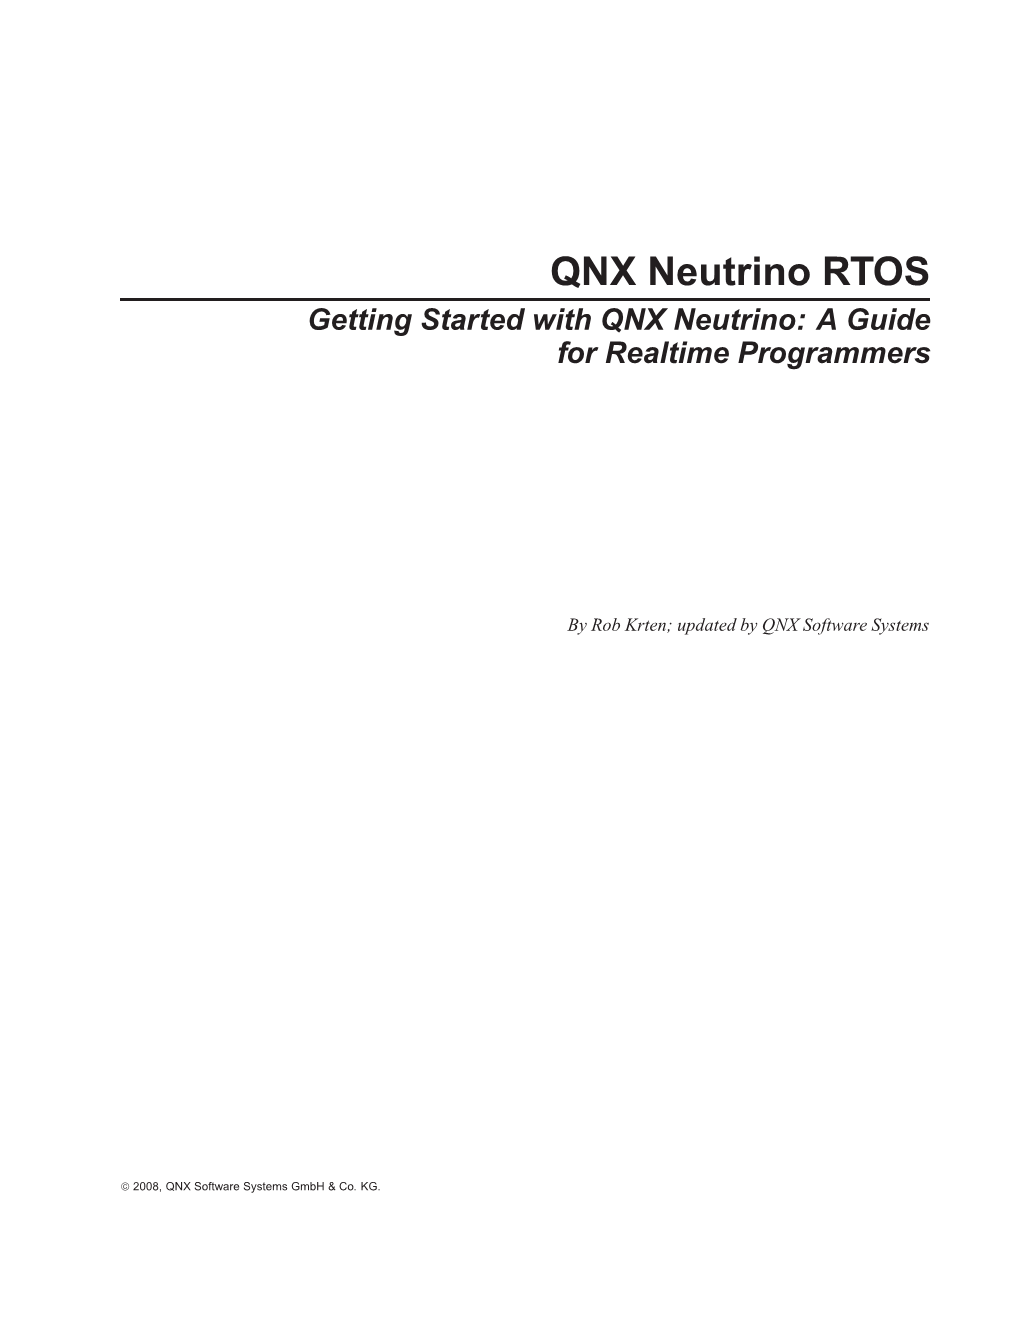 QNX Neutrino RTOS Getting Started with QNX Neutrino: a Guide for Realtime Programmers